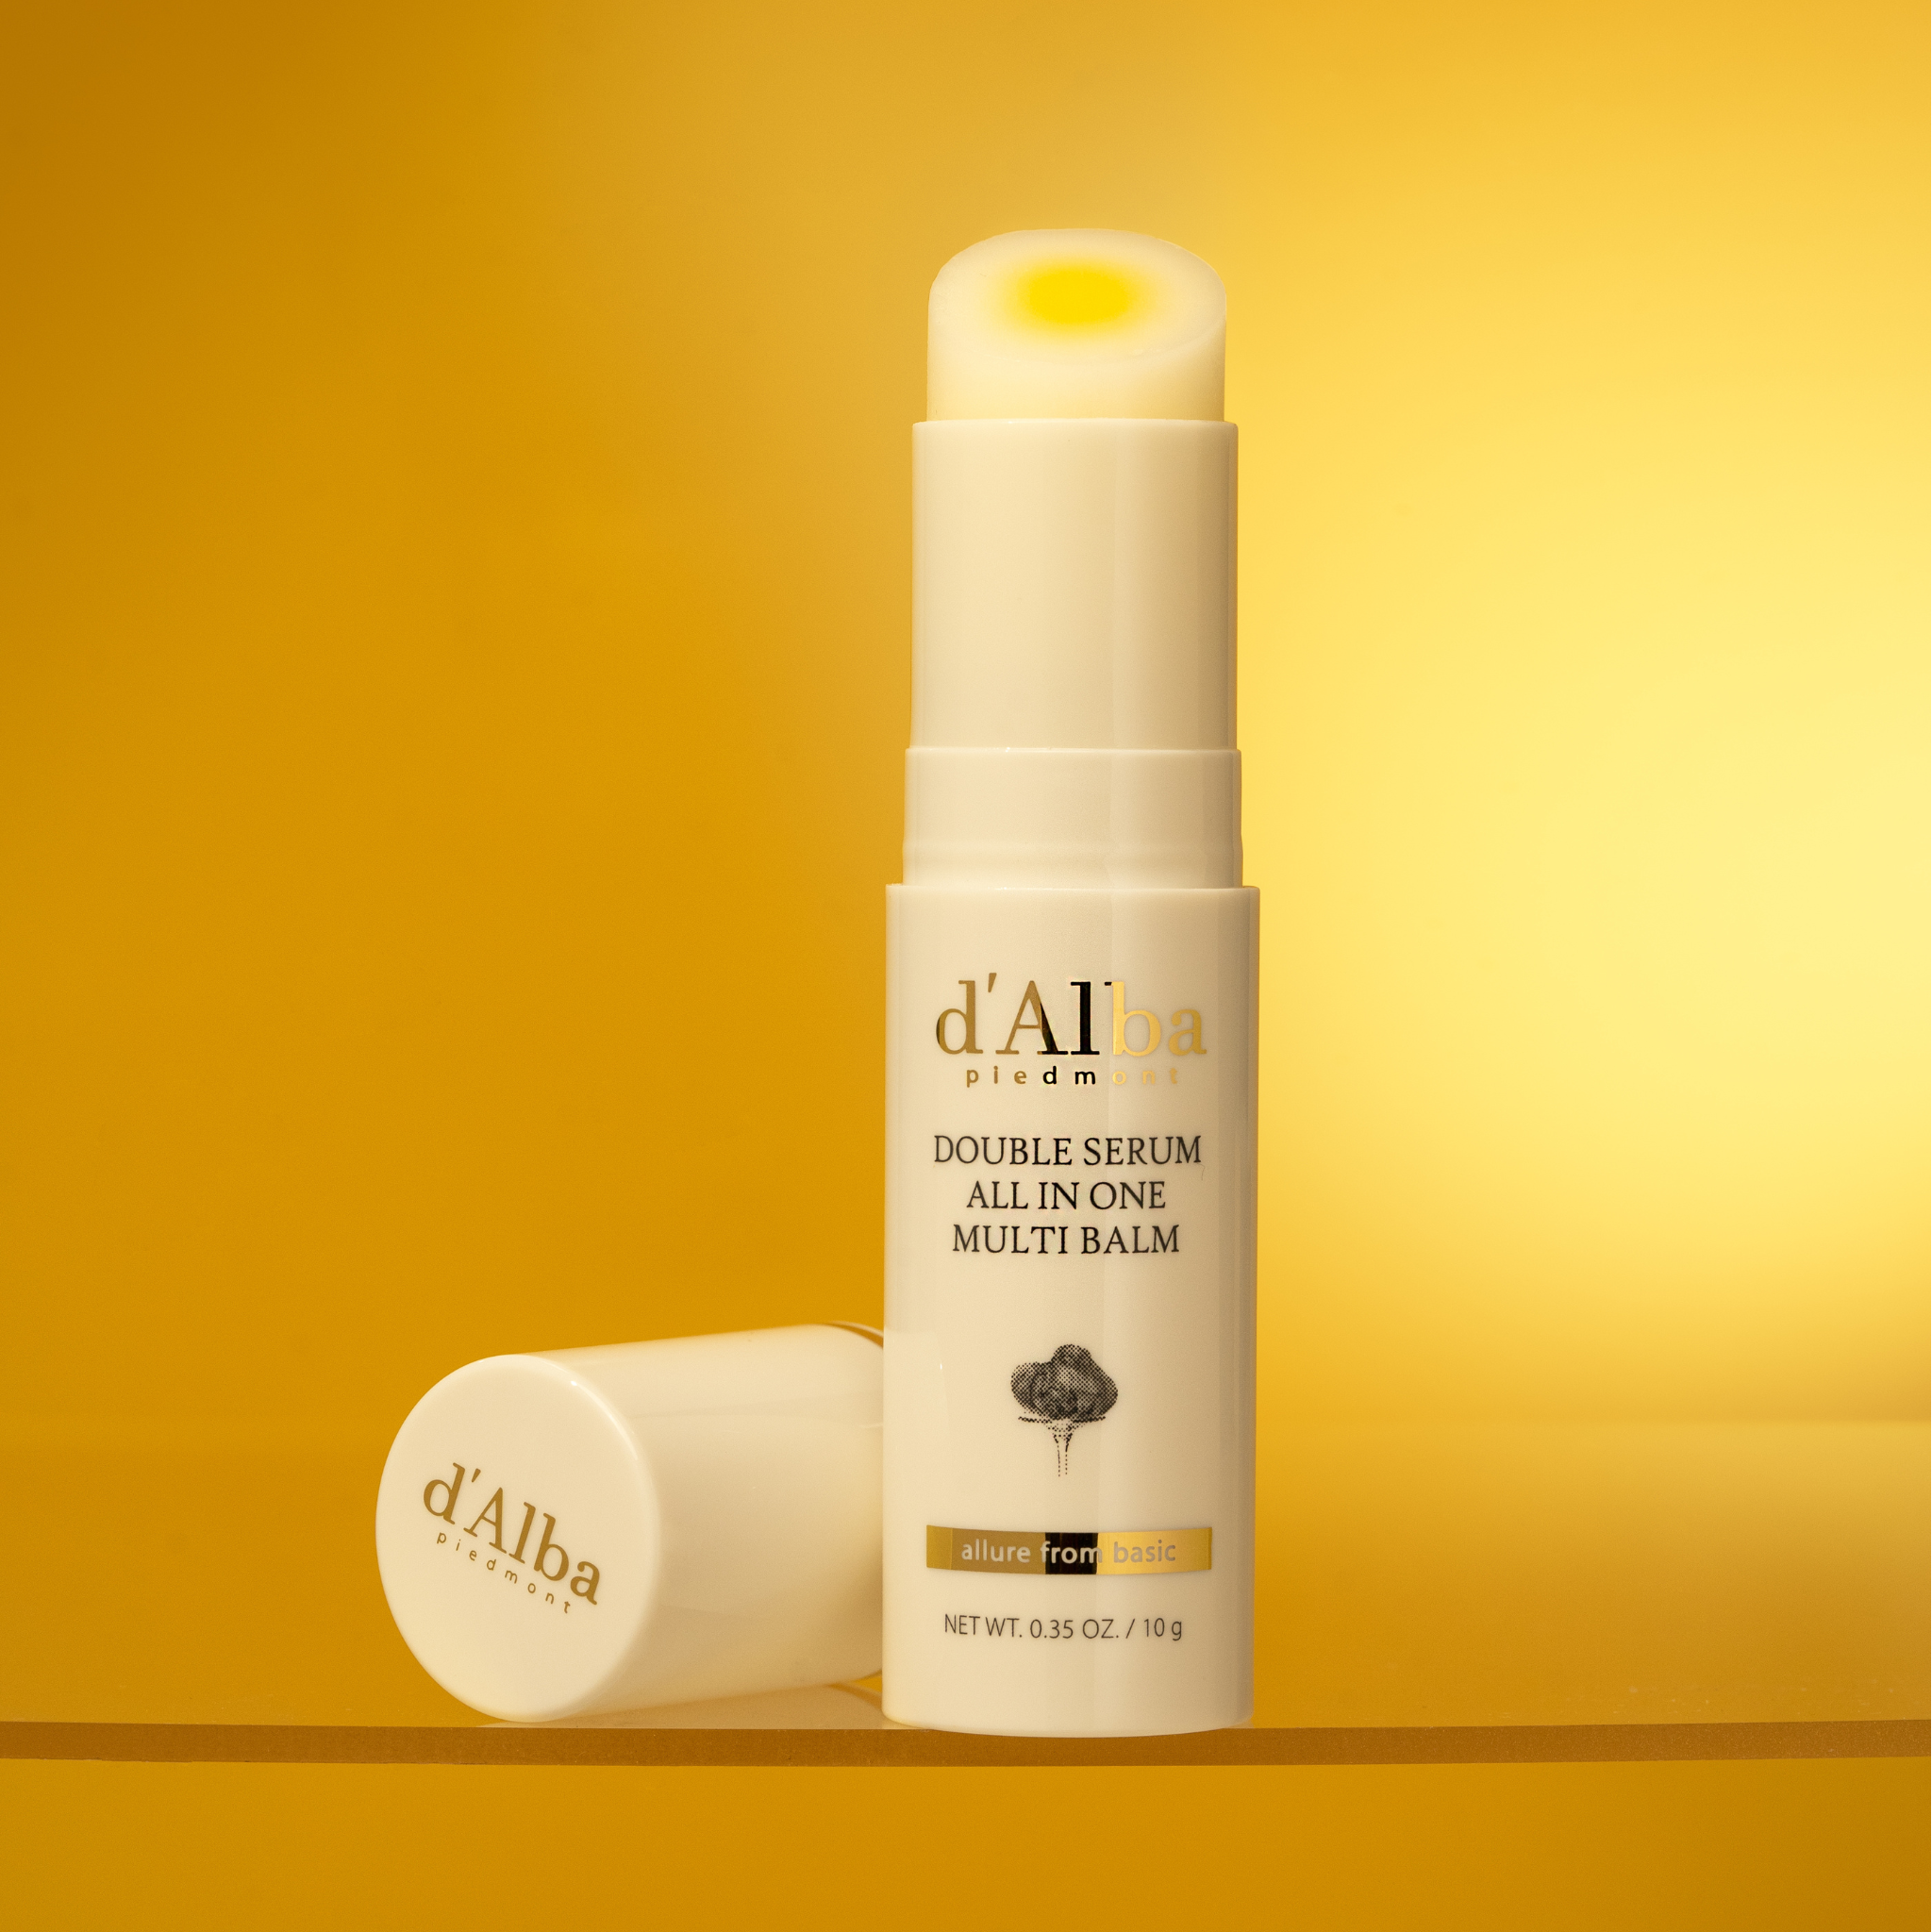 D’ALBA Double Serum All In One Multi Balm Product Image